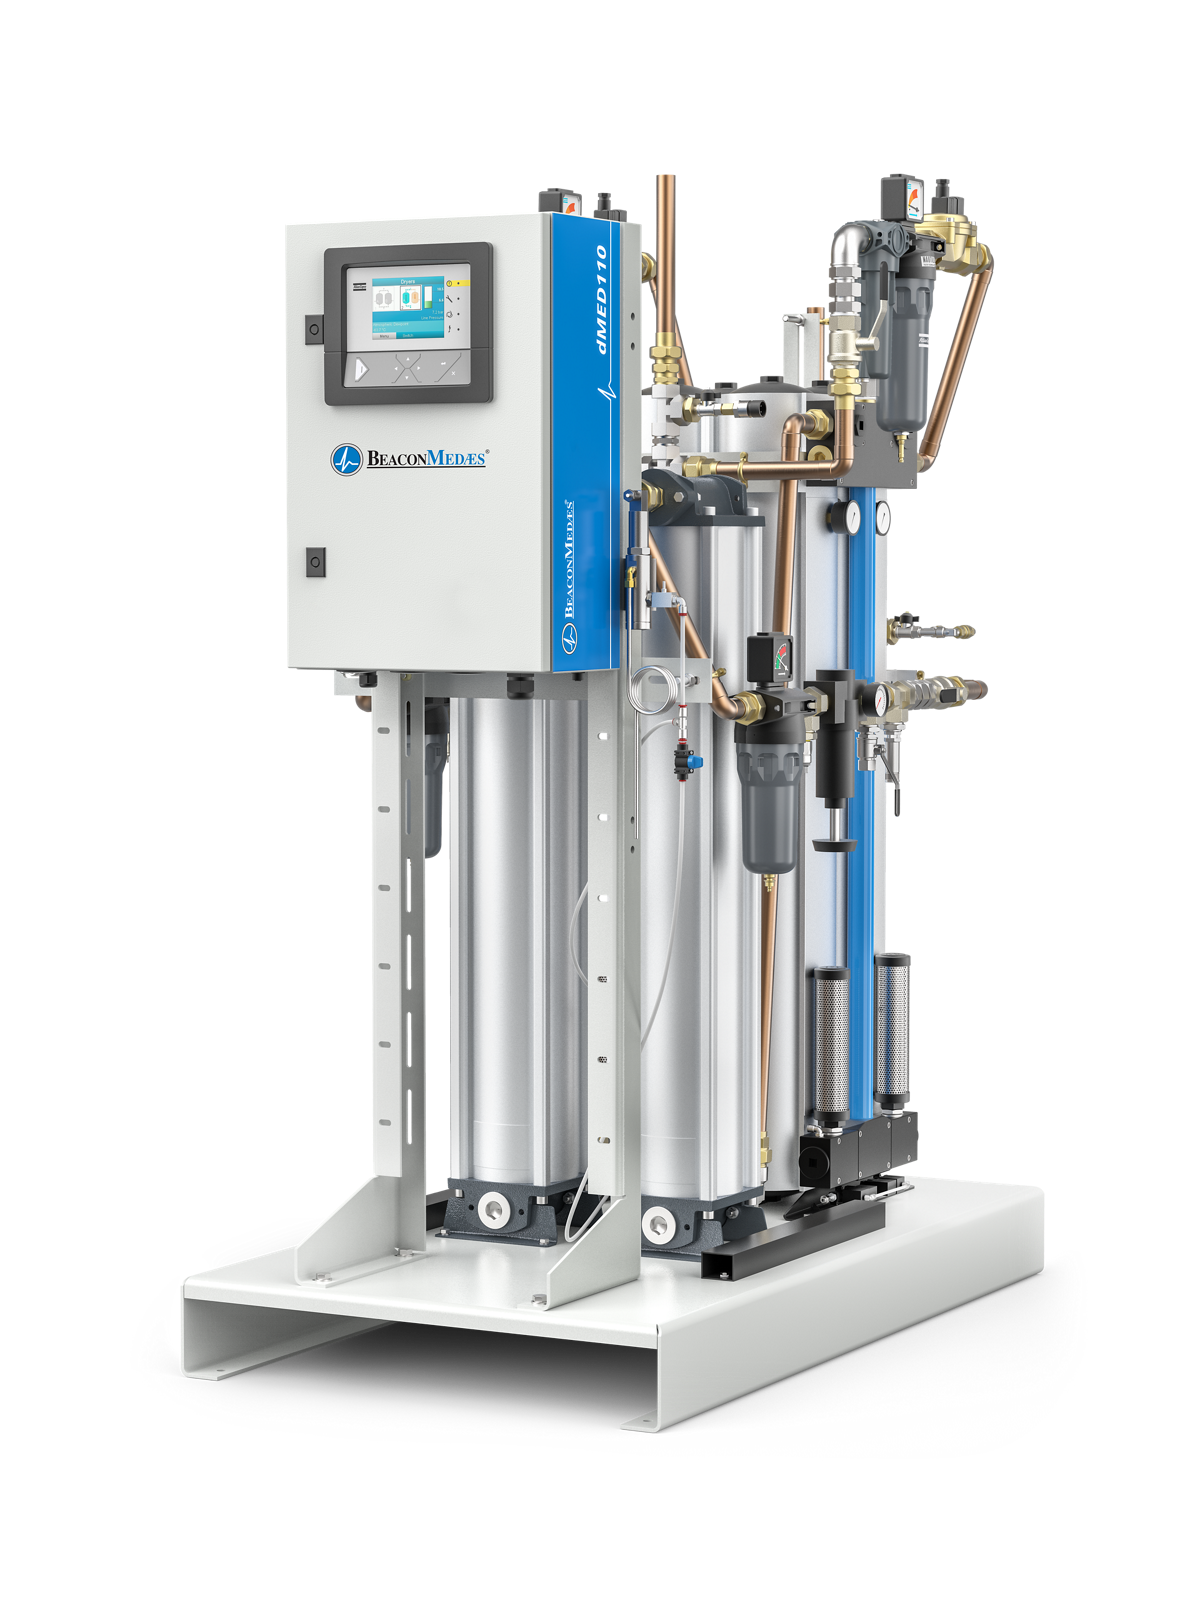 Suppliers of Medical Desiccant Air Dryers